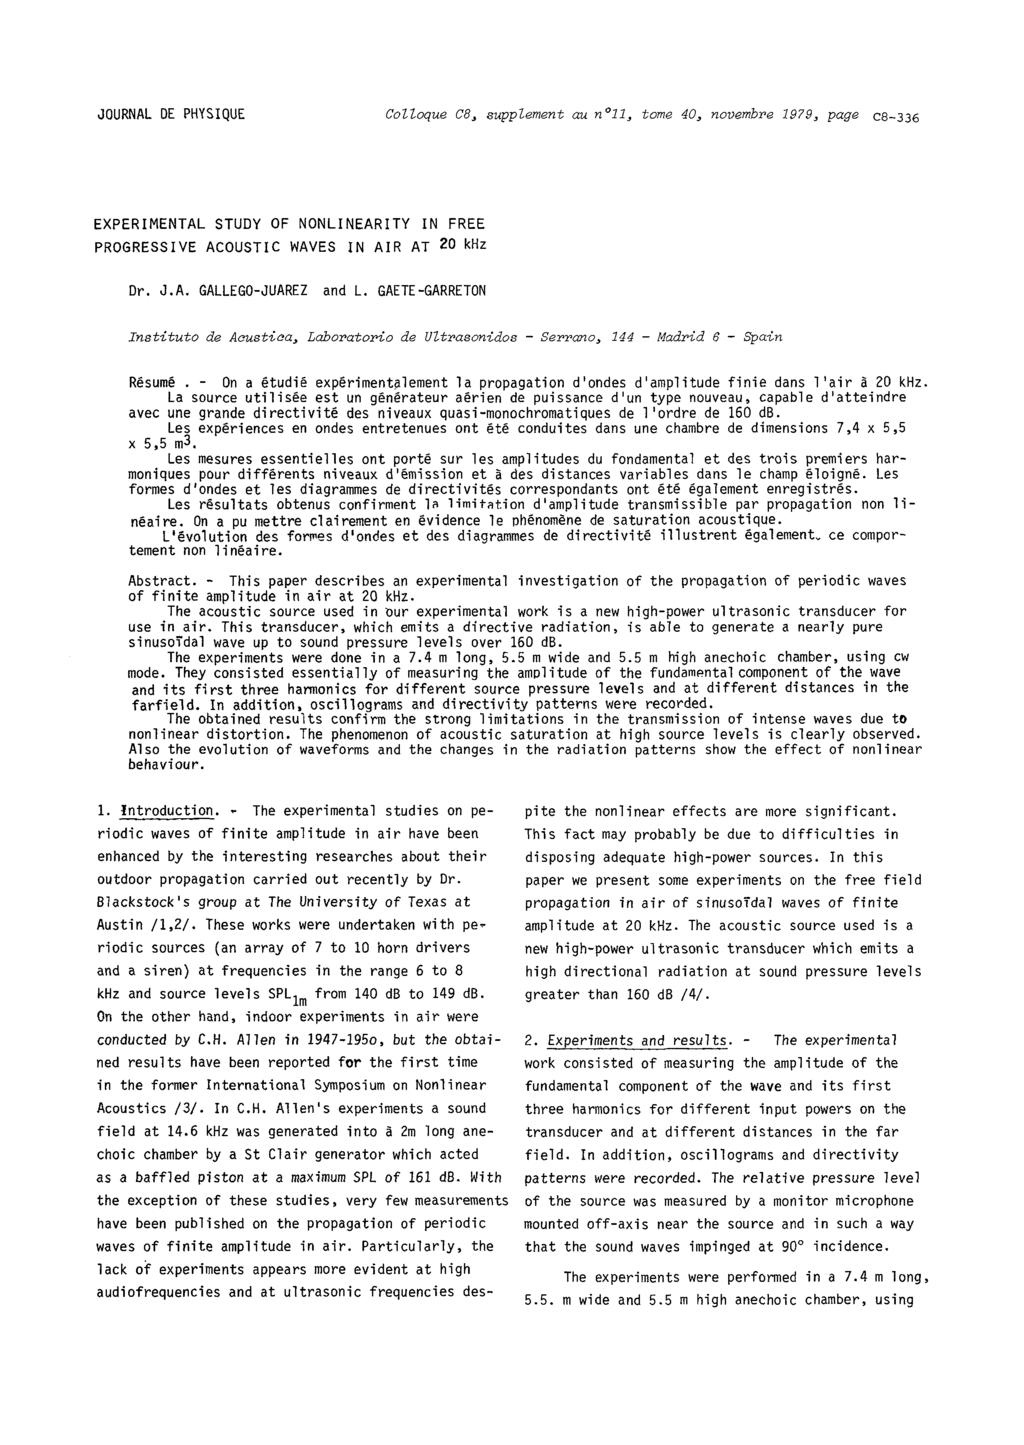 JOURNAL DE PHYSIQUE Colloque C8, supplément au n ll, tome 40, novembre 1979, page C8-336 EXPERIMENTAL STUDY OF NONLINEARITY IN FREE PROGRESSIVE ACOUSTIC WAVES IN AIR AT 20 khz Dr. J.A. GALLEGO-JUAREZ and L.